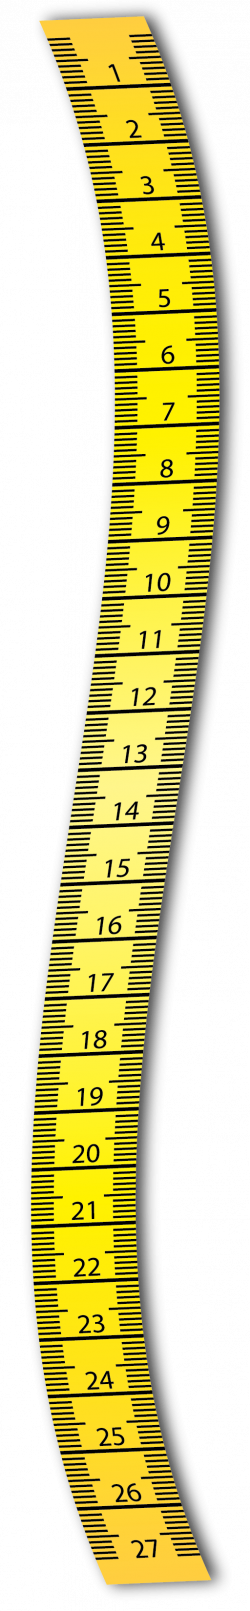 Measure tape PNG images free download